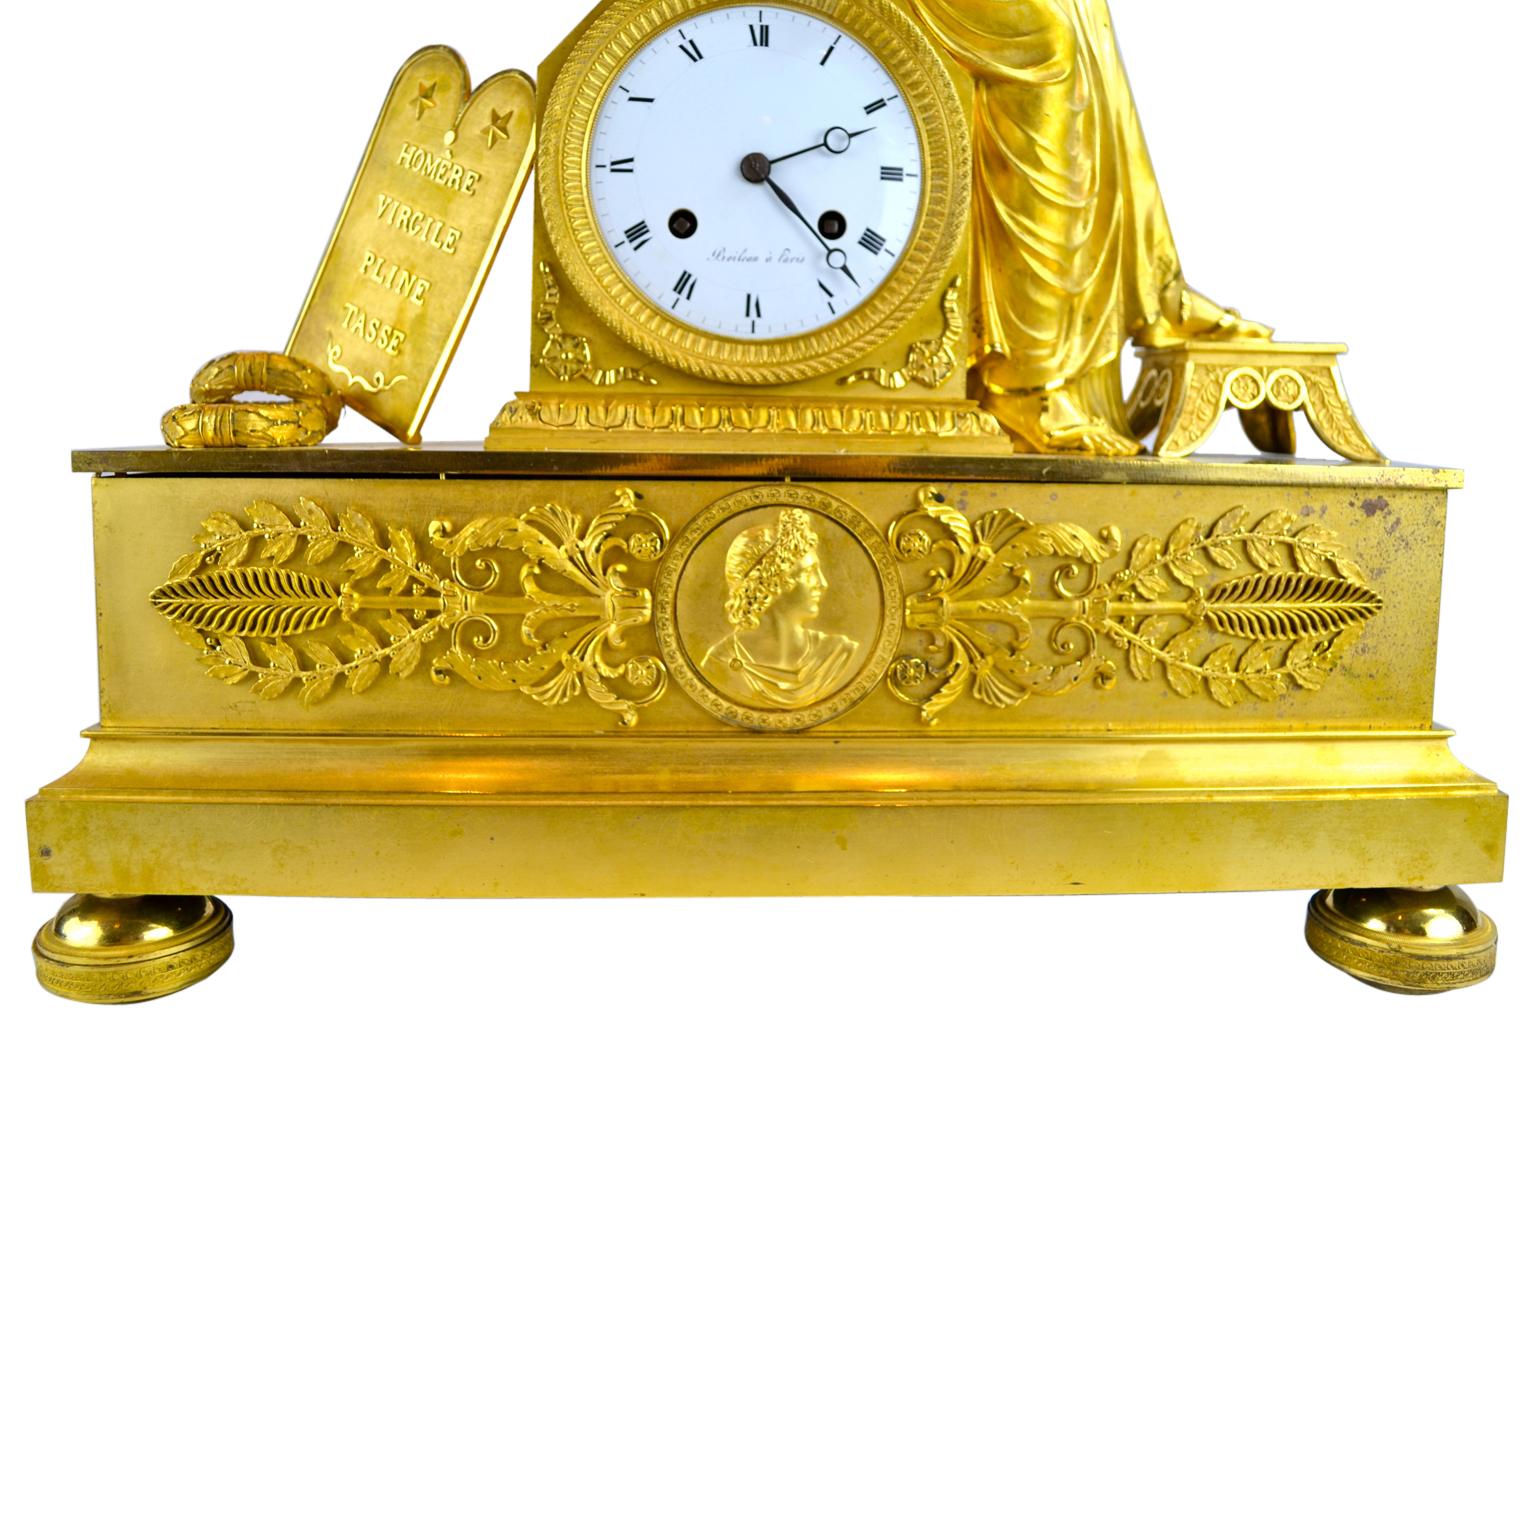 Allegorical Gilt Bronze Clock Depiction Clio, the Muse of History and Music In Good Condition For Sale In Vancouver, British Columbia